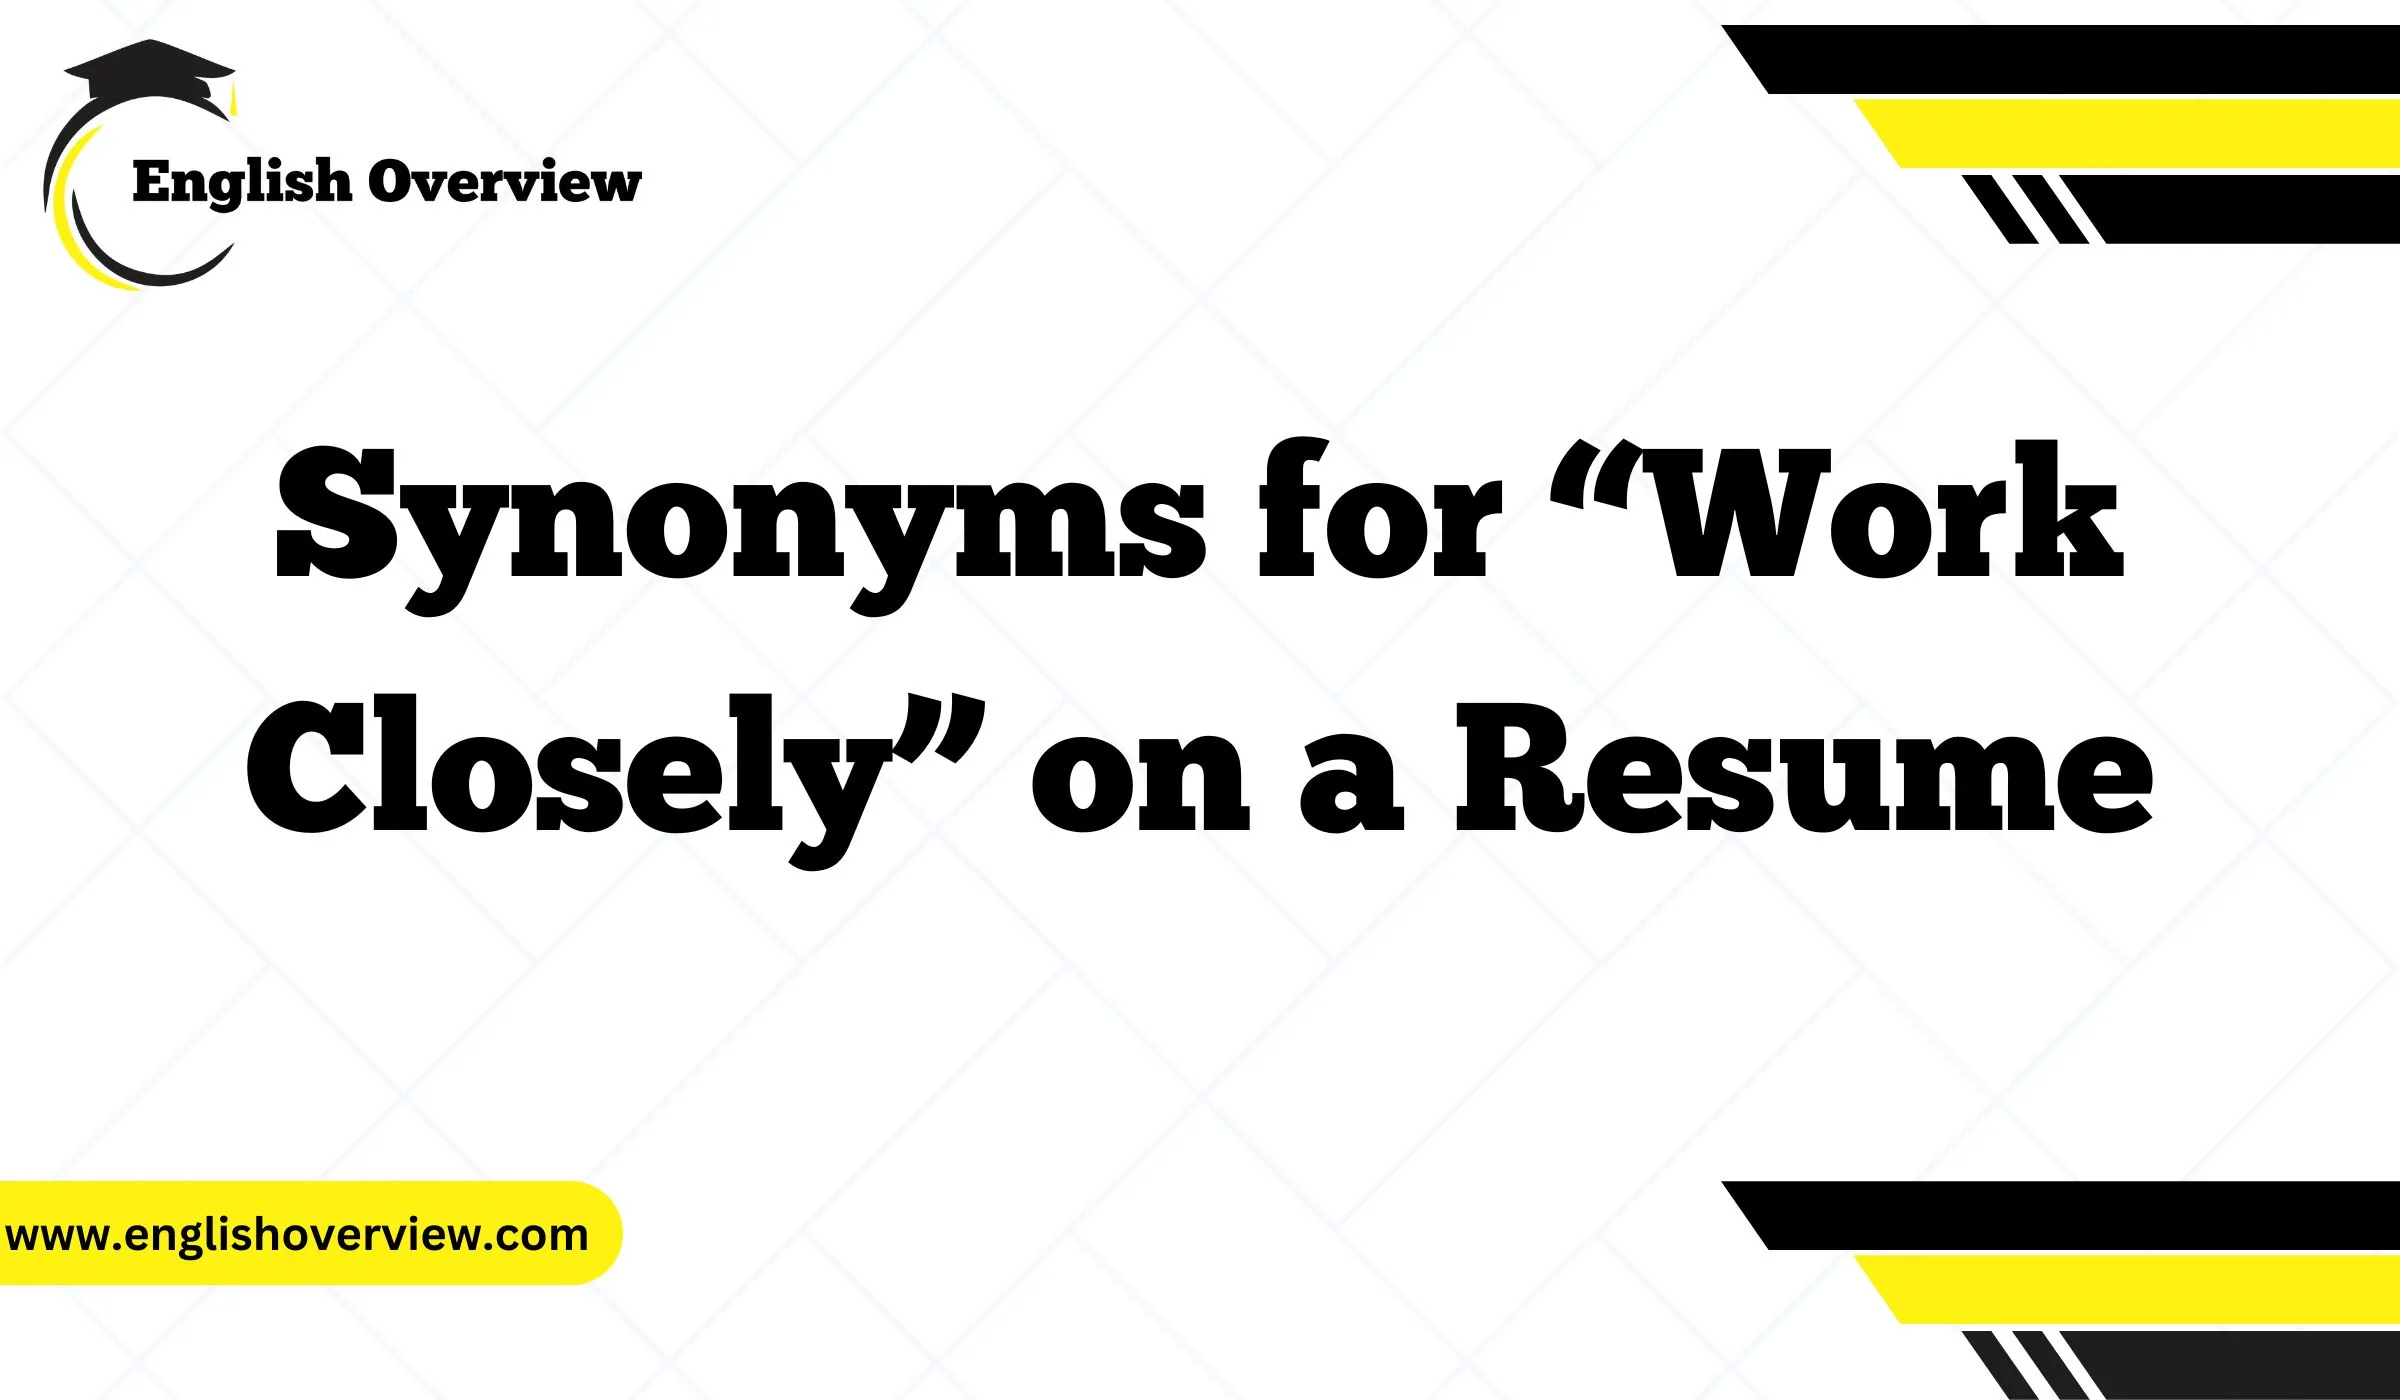 Synonyms for “Work Closely” on a Resume